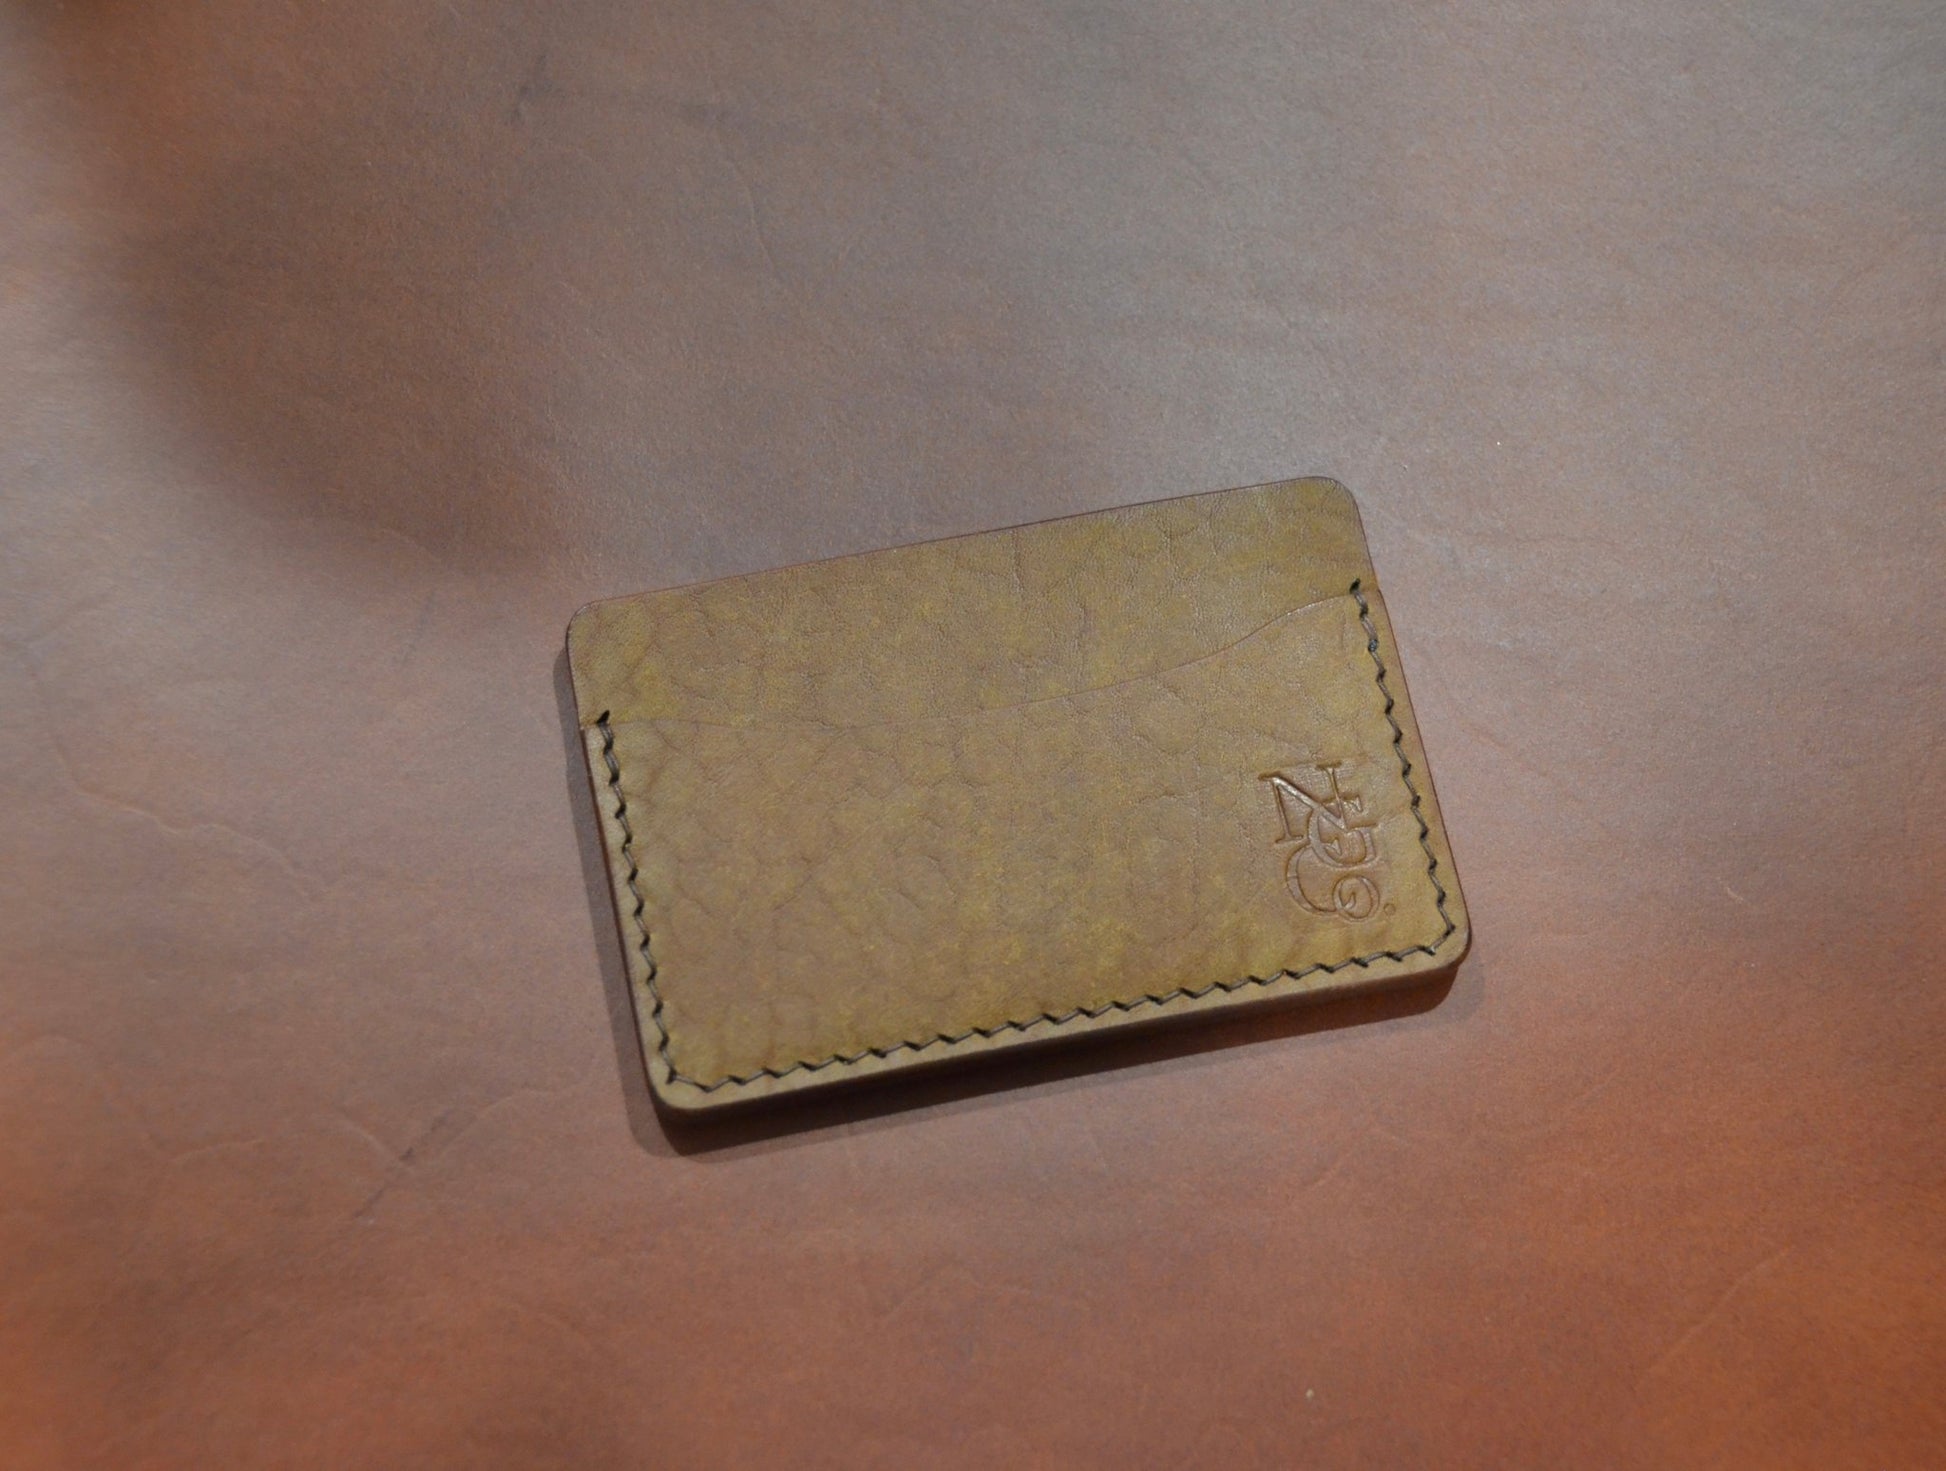 Minimalist Leather Card Holder - NATS GOODS CO.